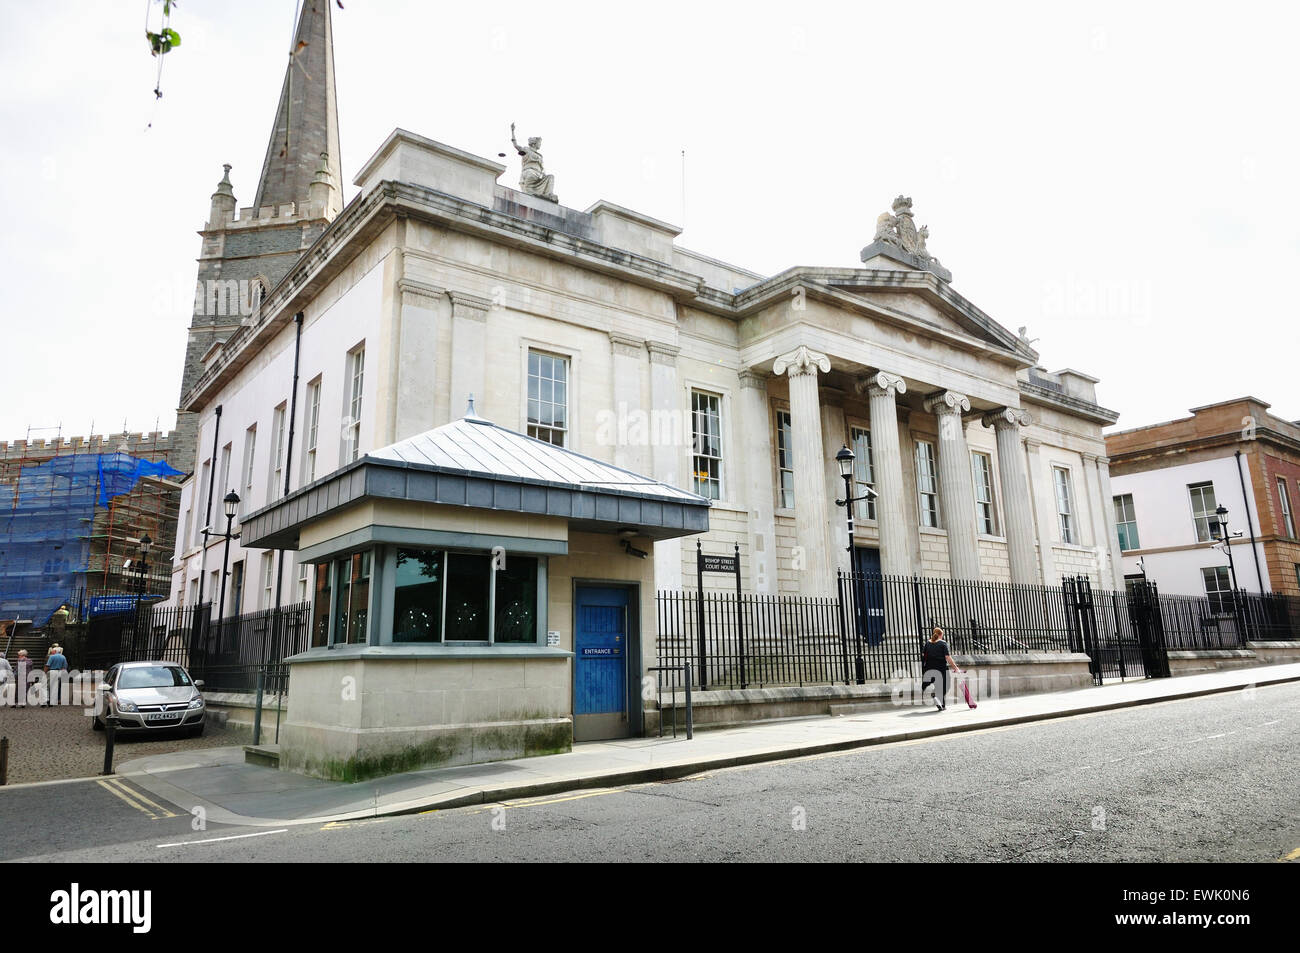 Bishop Street Courthouse. Derry, Londonderry. County Londonderry. Northern Ireland. United Kingdom. UK Stock Photo